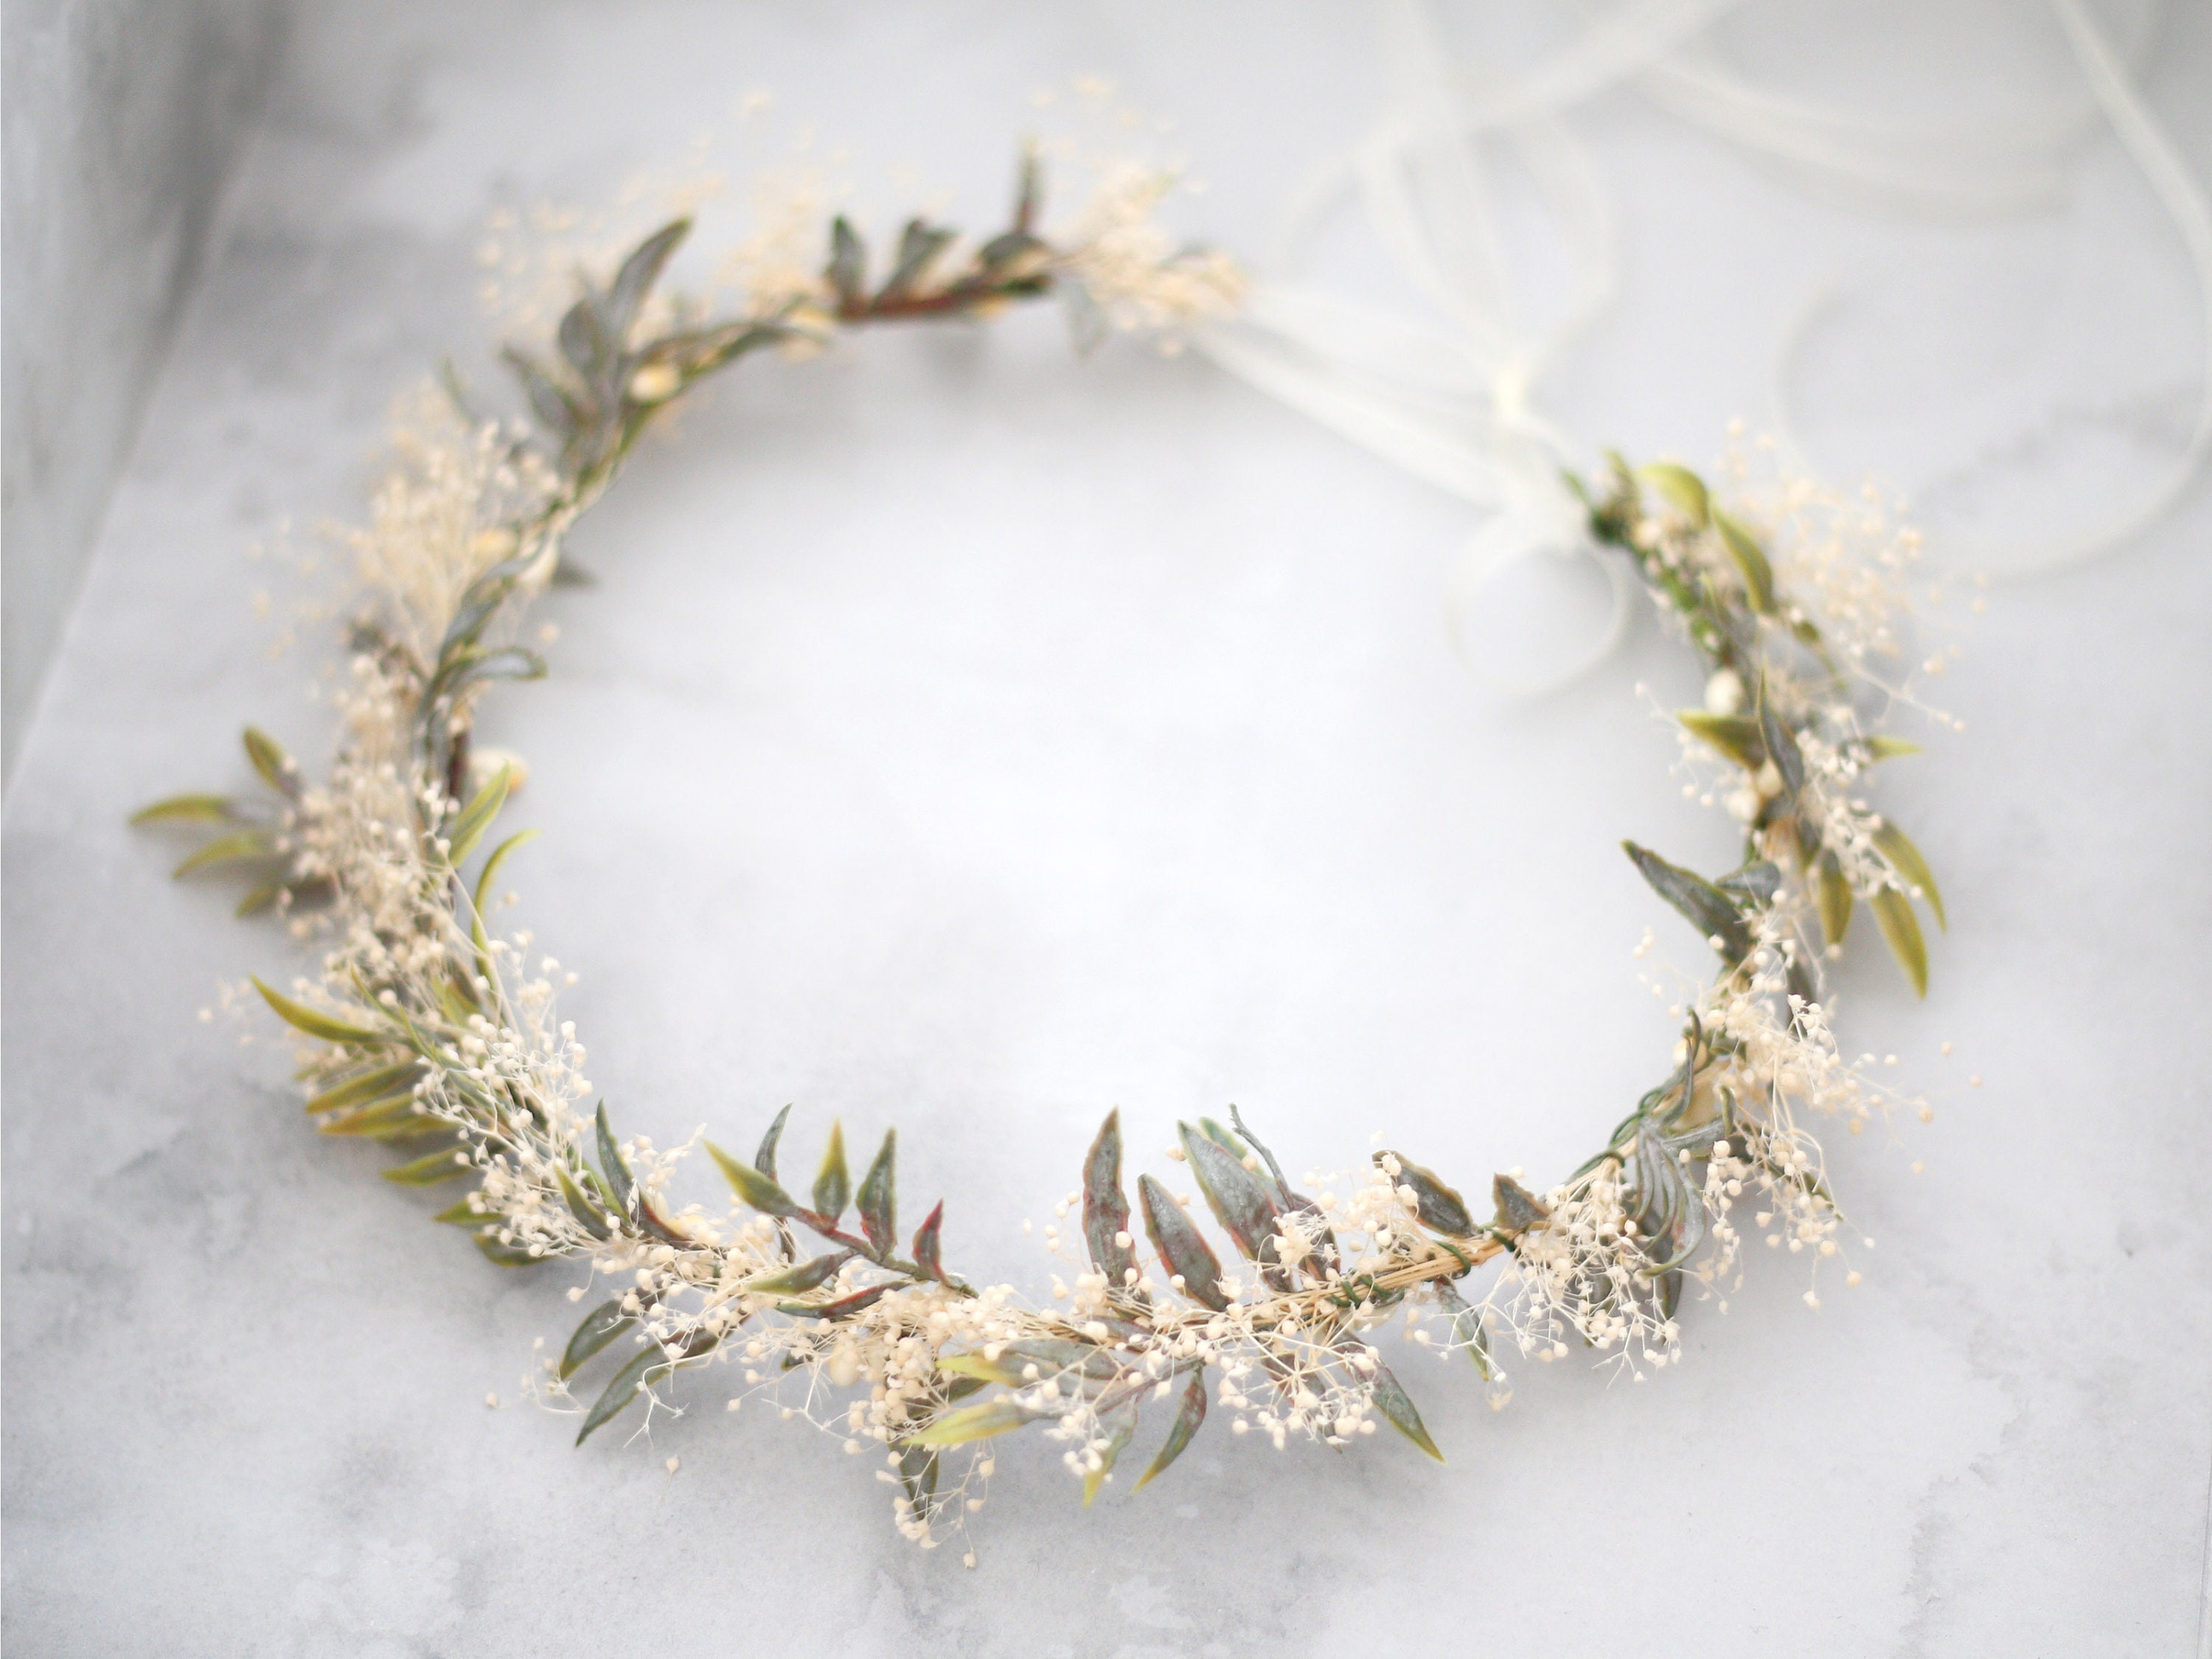 DIY Dried and Preserved Flower Crown Kit. Premium Full Crown. Any Size 